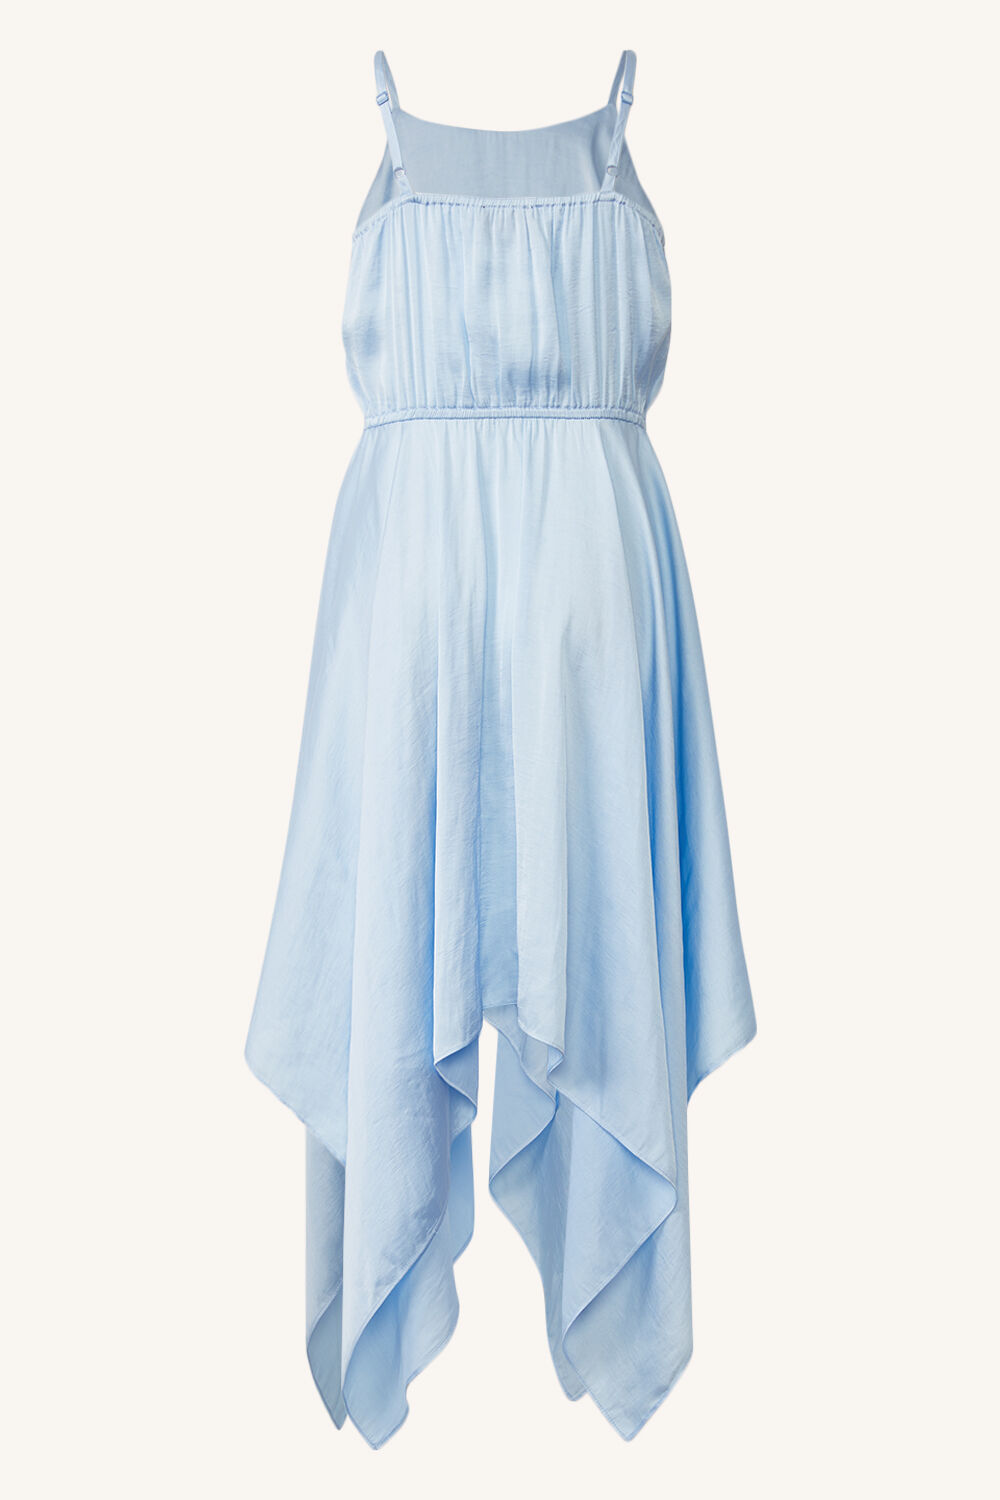 ADDY HANKY DRESS in colour CROWN BLUE